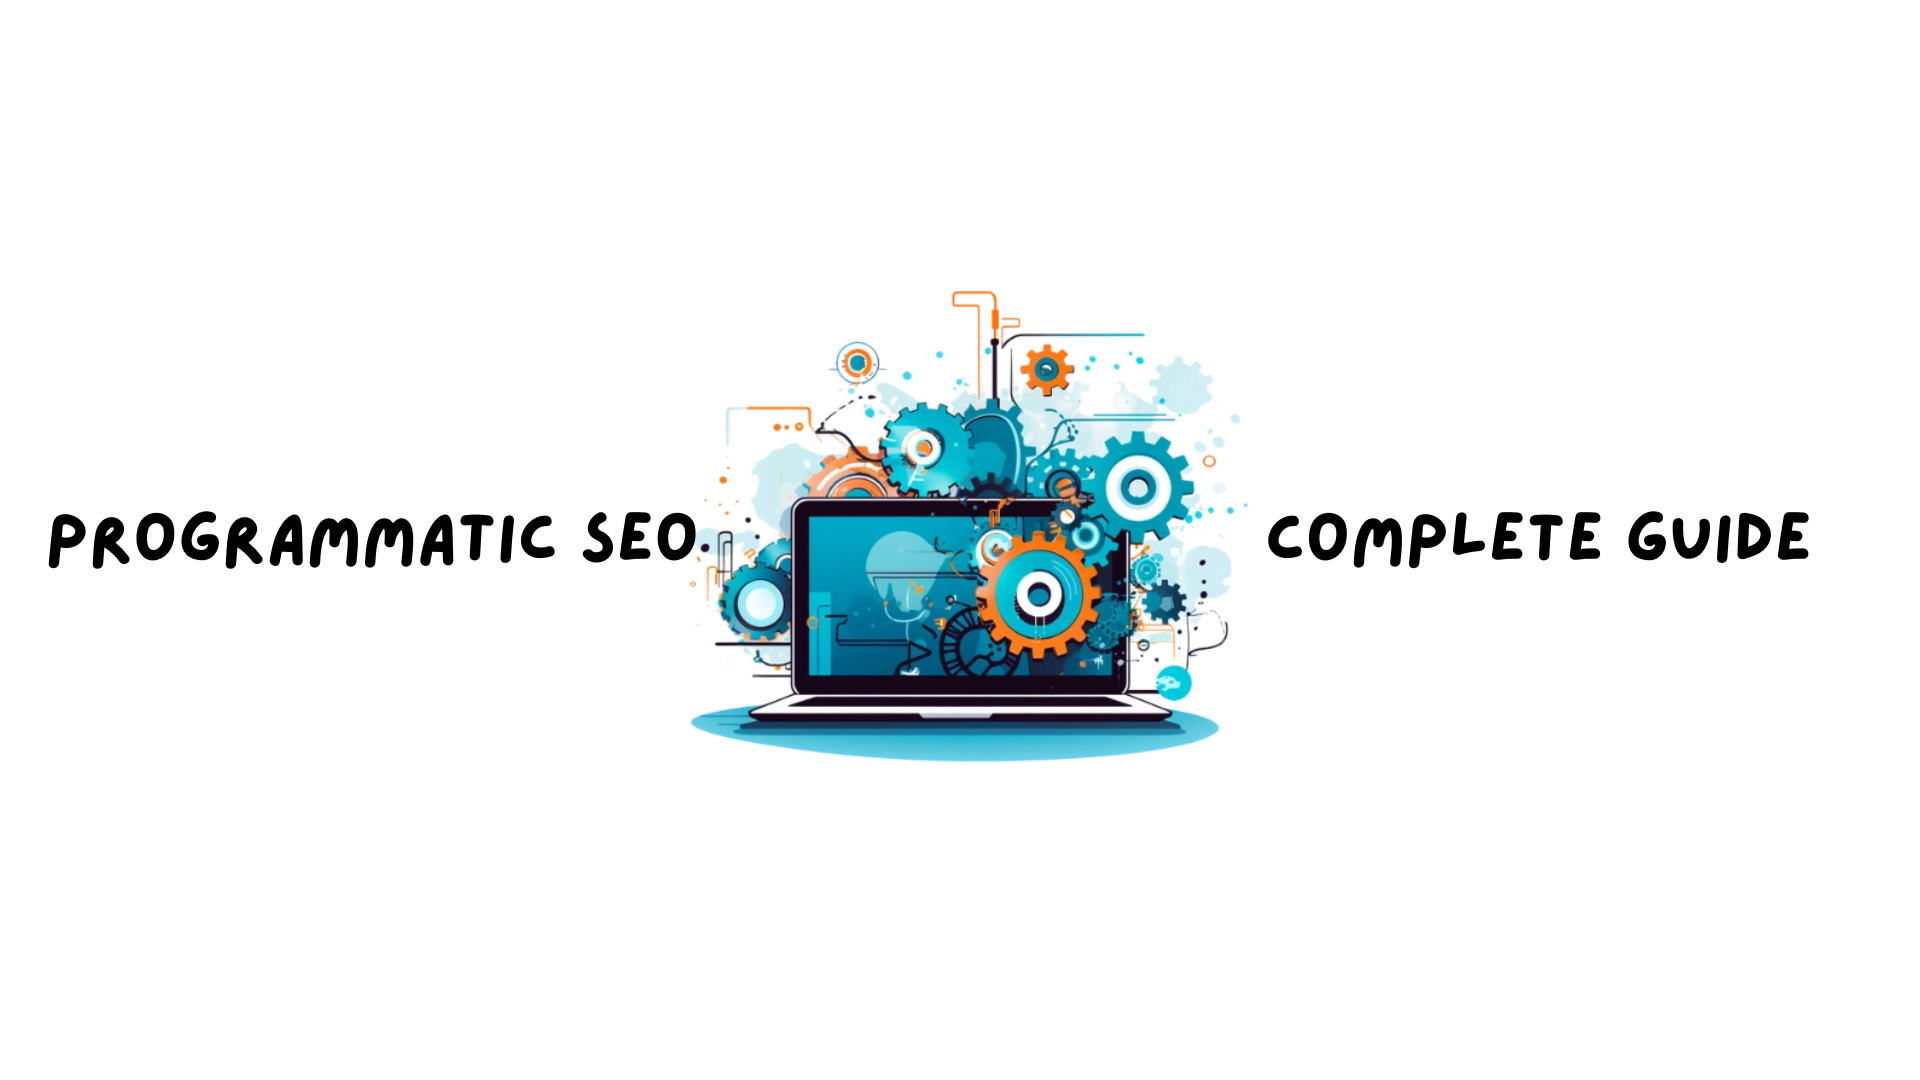 Programmatic SEO: How to get started